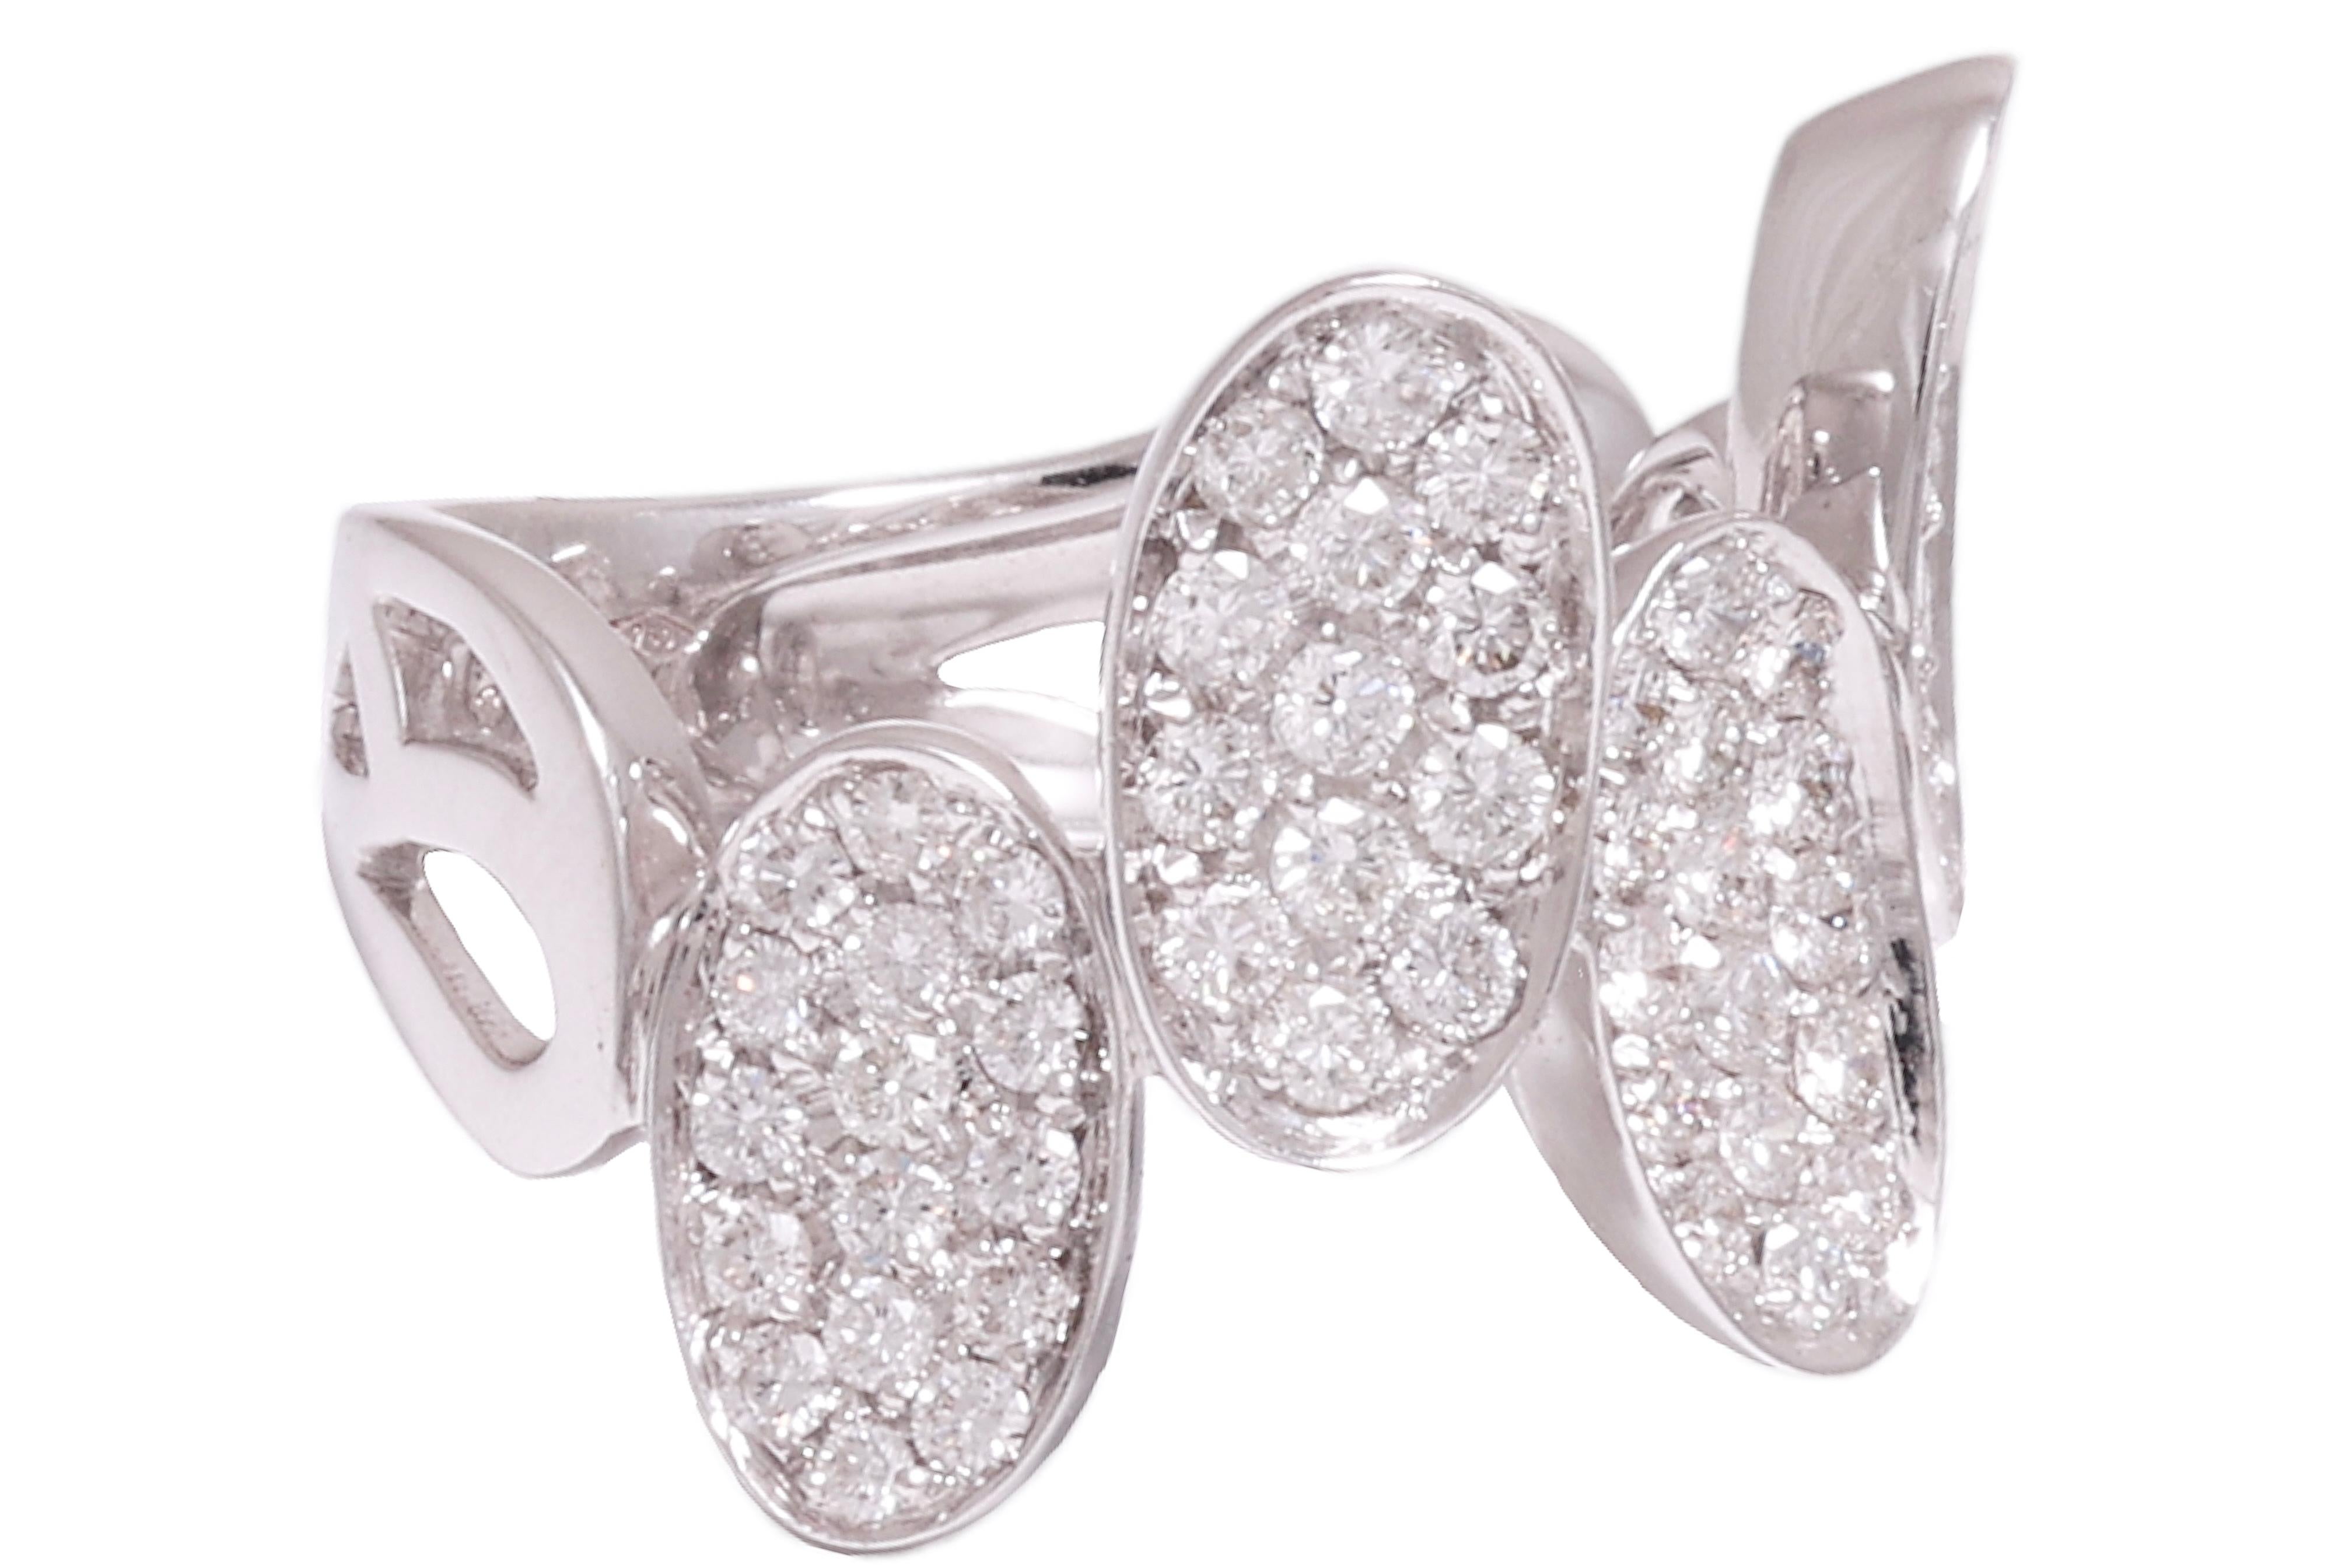 Fabulous 18 kt. White Gold Ring With 1.48 ct. Diamonds 

Diamonds: Brilliant cut diamonds, together approx. 1.48 ct.

Material: 18 kt. white gold

Ring size: 54 EU / 7 US ( can be resized for free)

Total weight: 8.4 gram / 0.295 oz / 5.4 dwt

